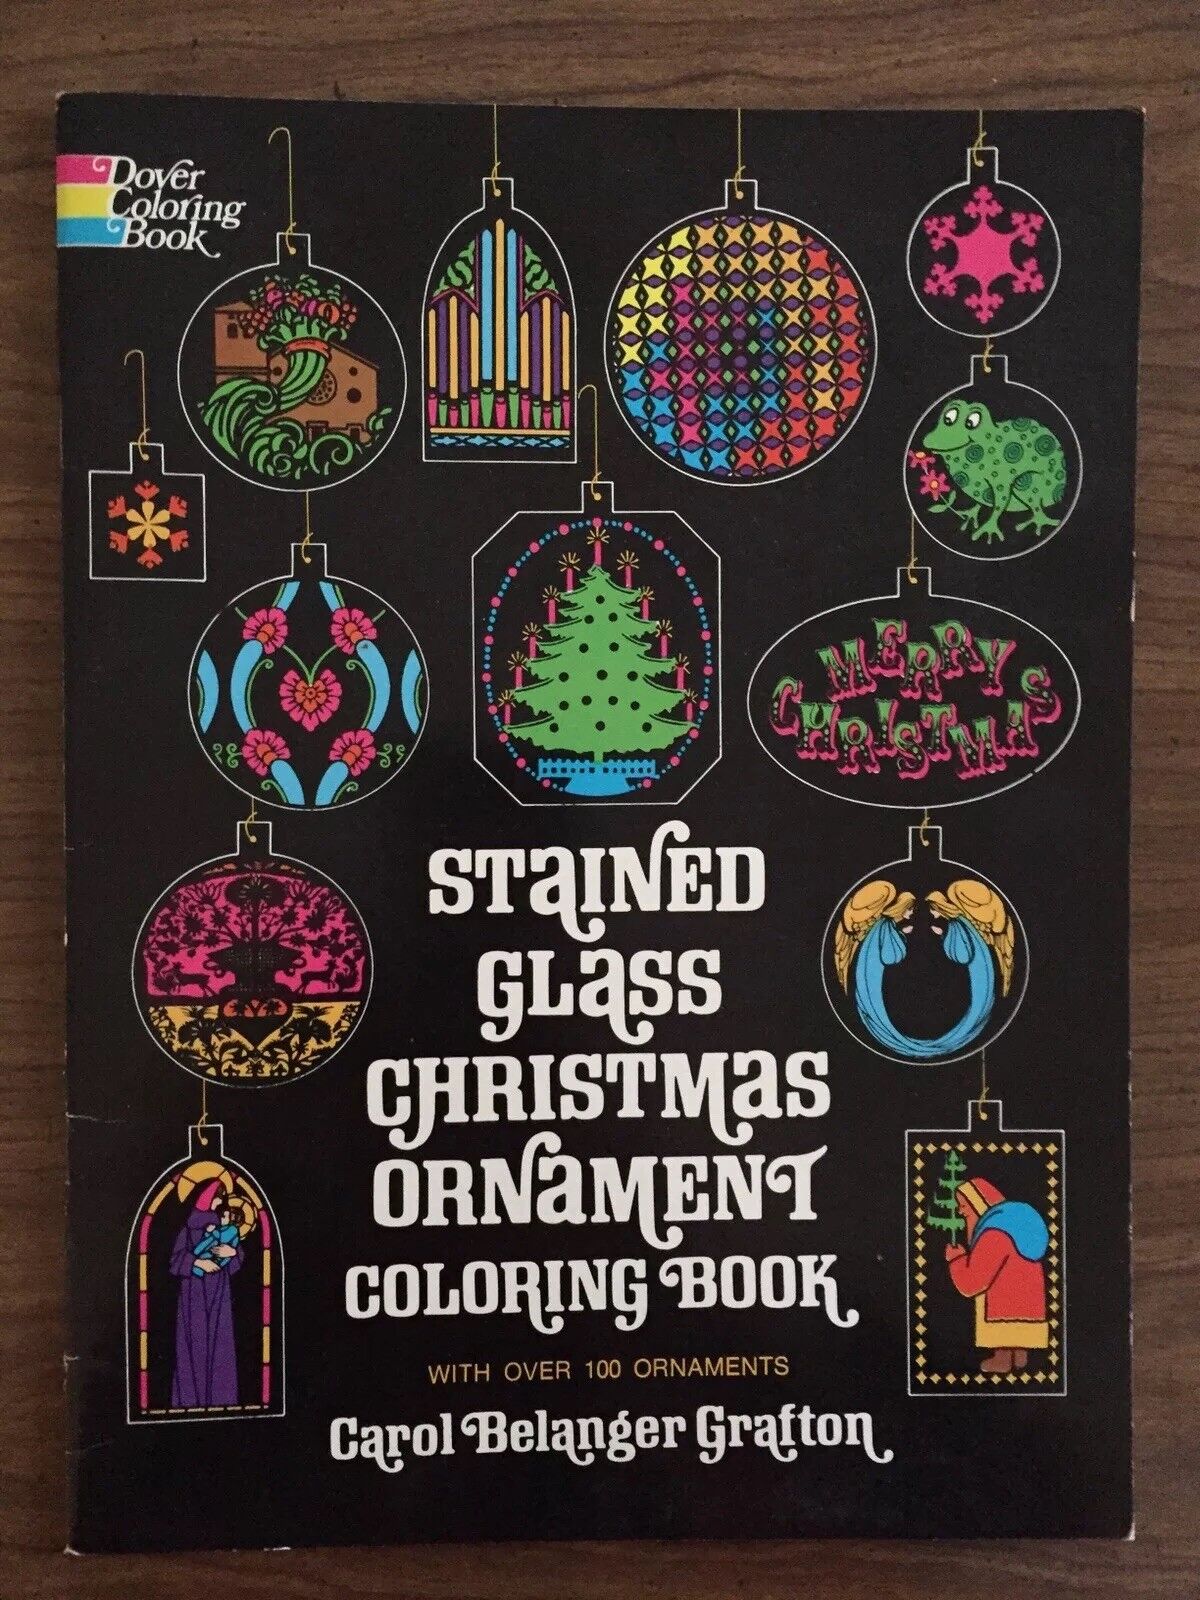 Stained glass christmas ornament coloring book by carol belanger grafton